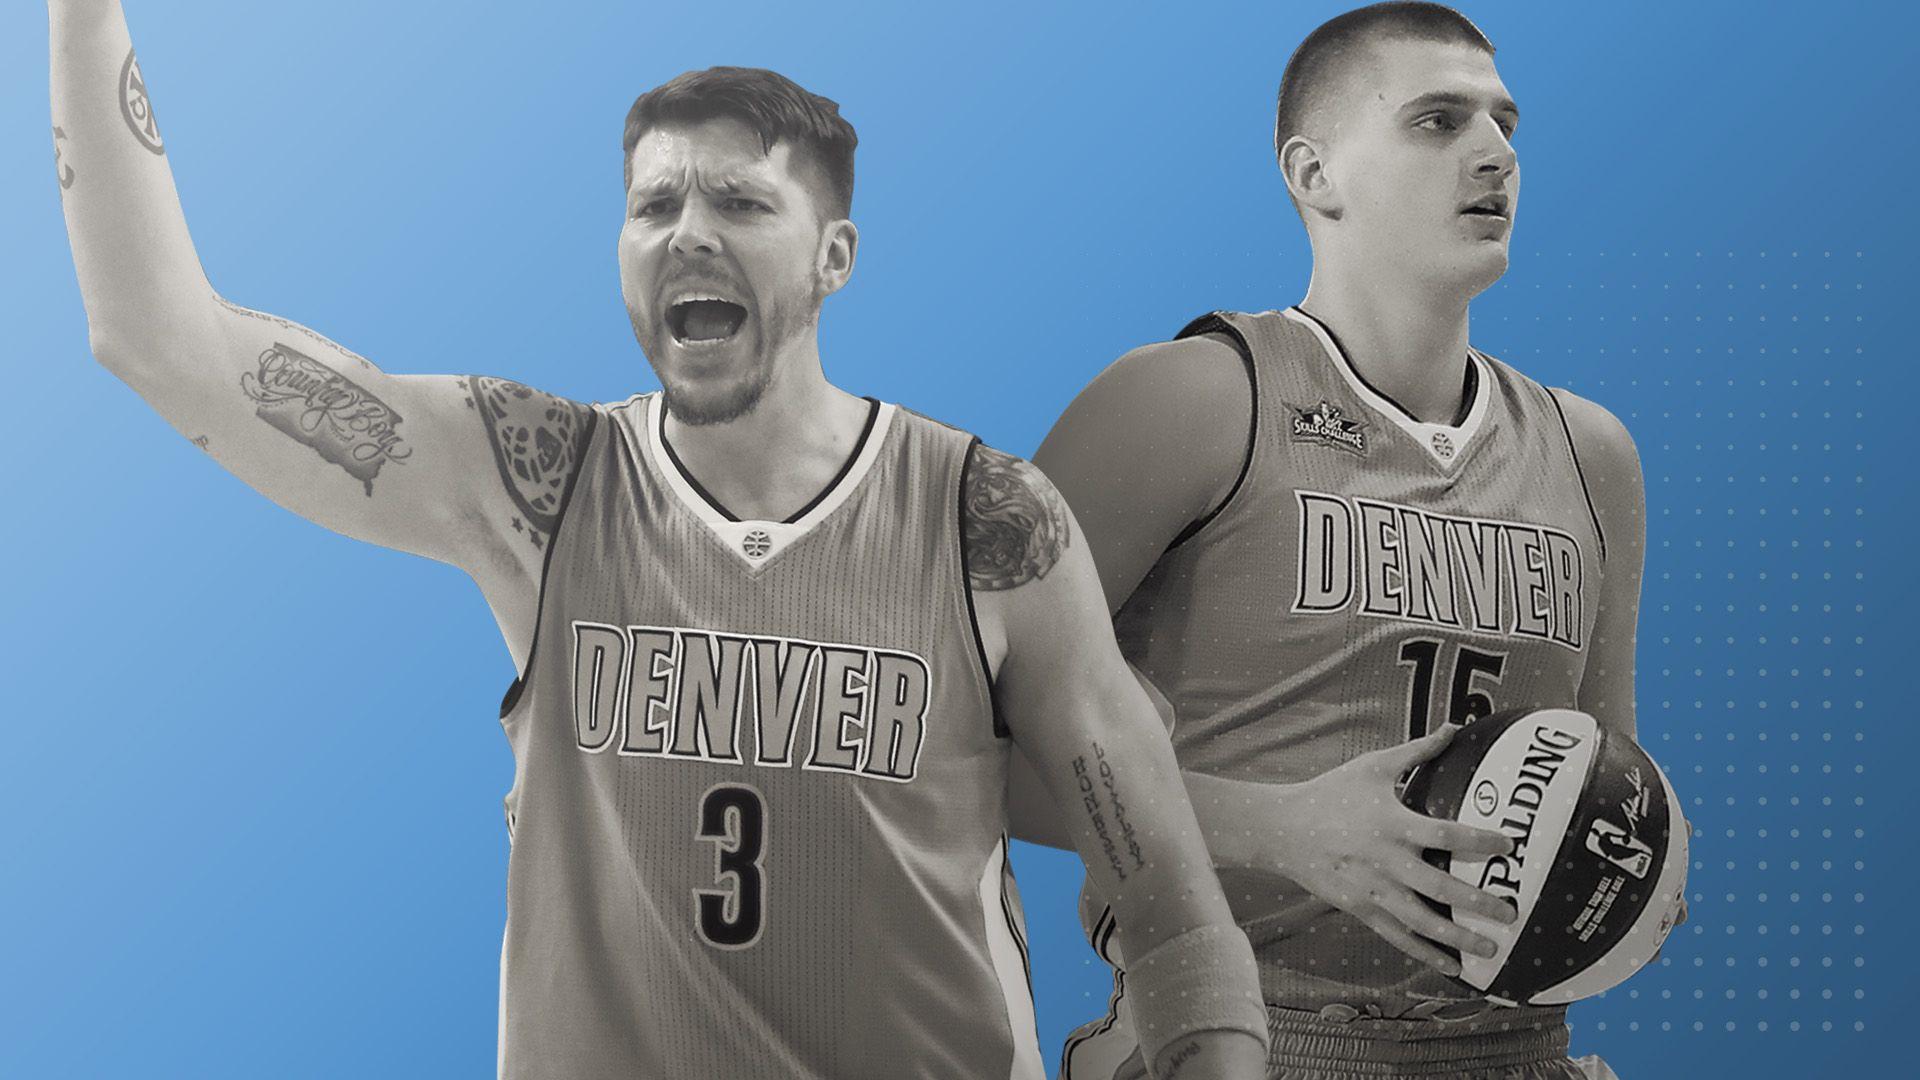 Nikola Jokic and Mike Miller have the NBA's most underrated